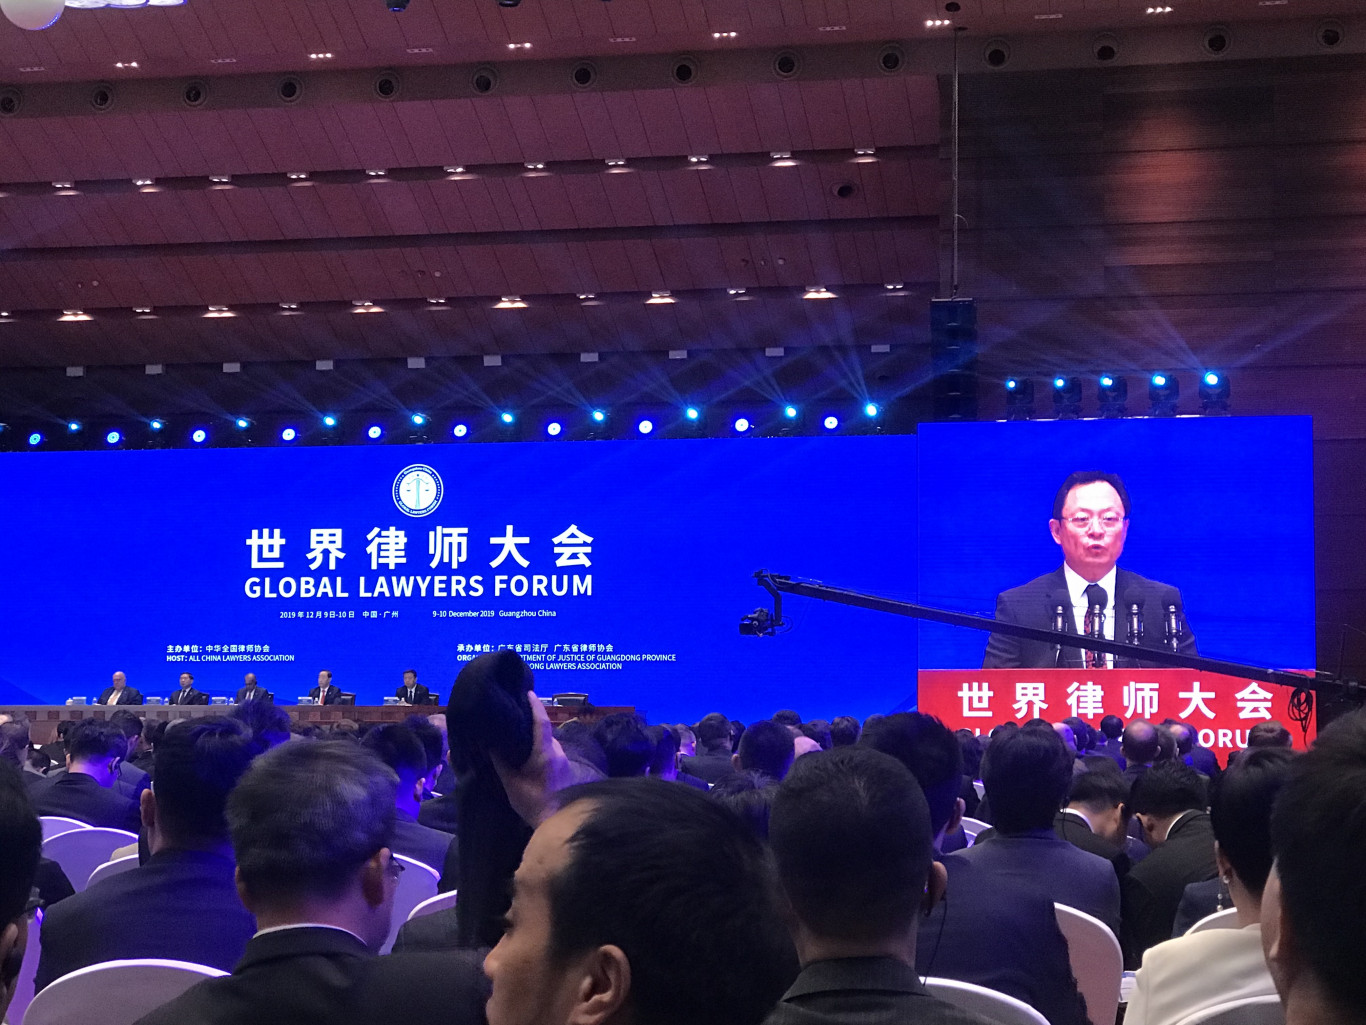 GLF was carefully prepared by the host country China where different sectors of legal matters were discussed and shared. China also wants to show the new role of lawyers to their country.